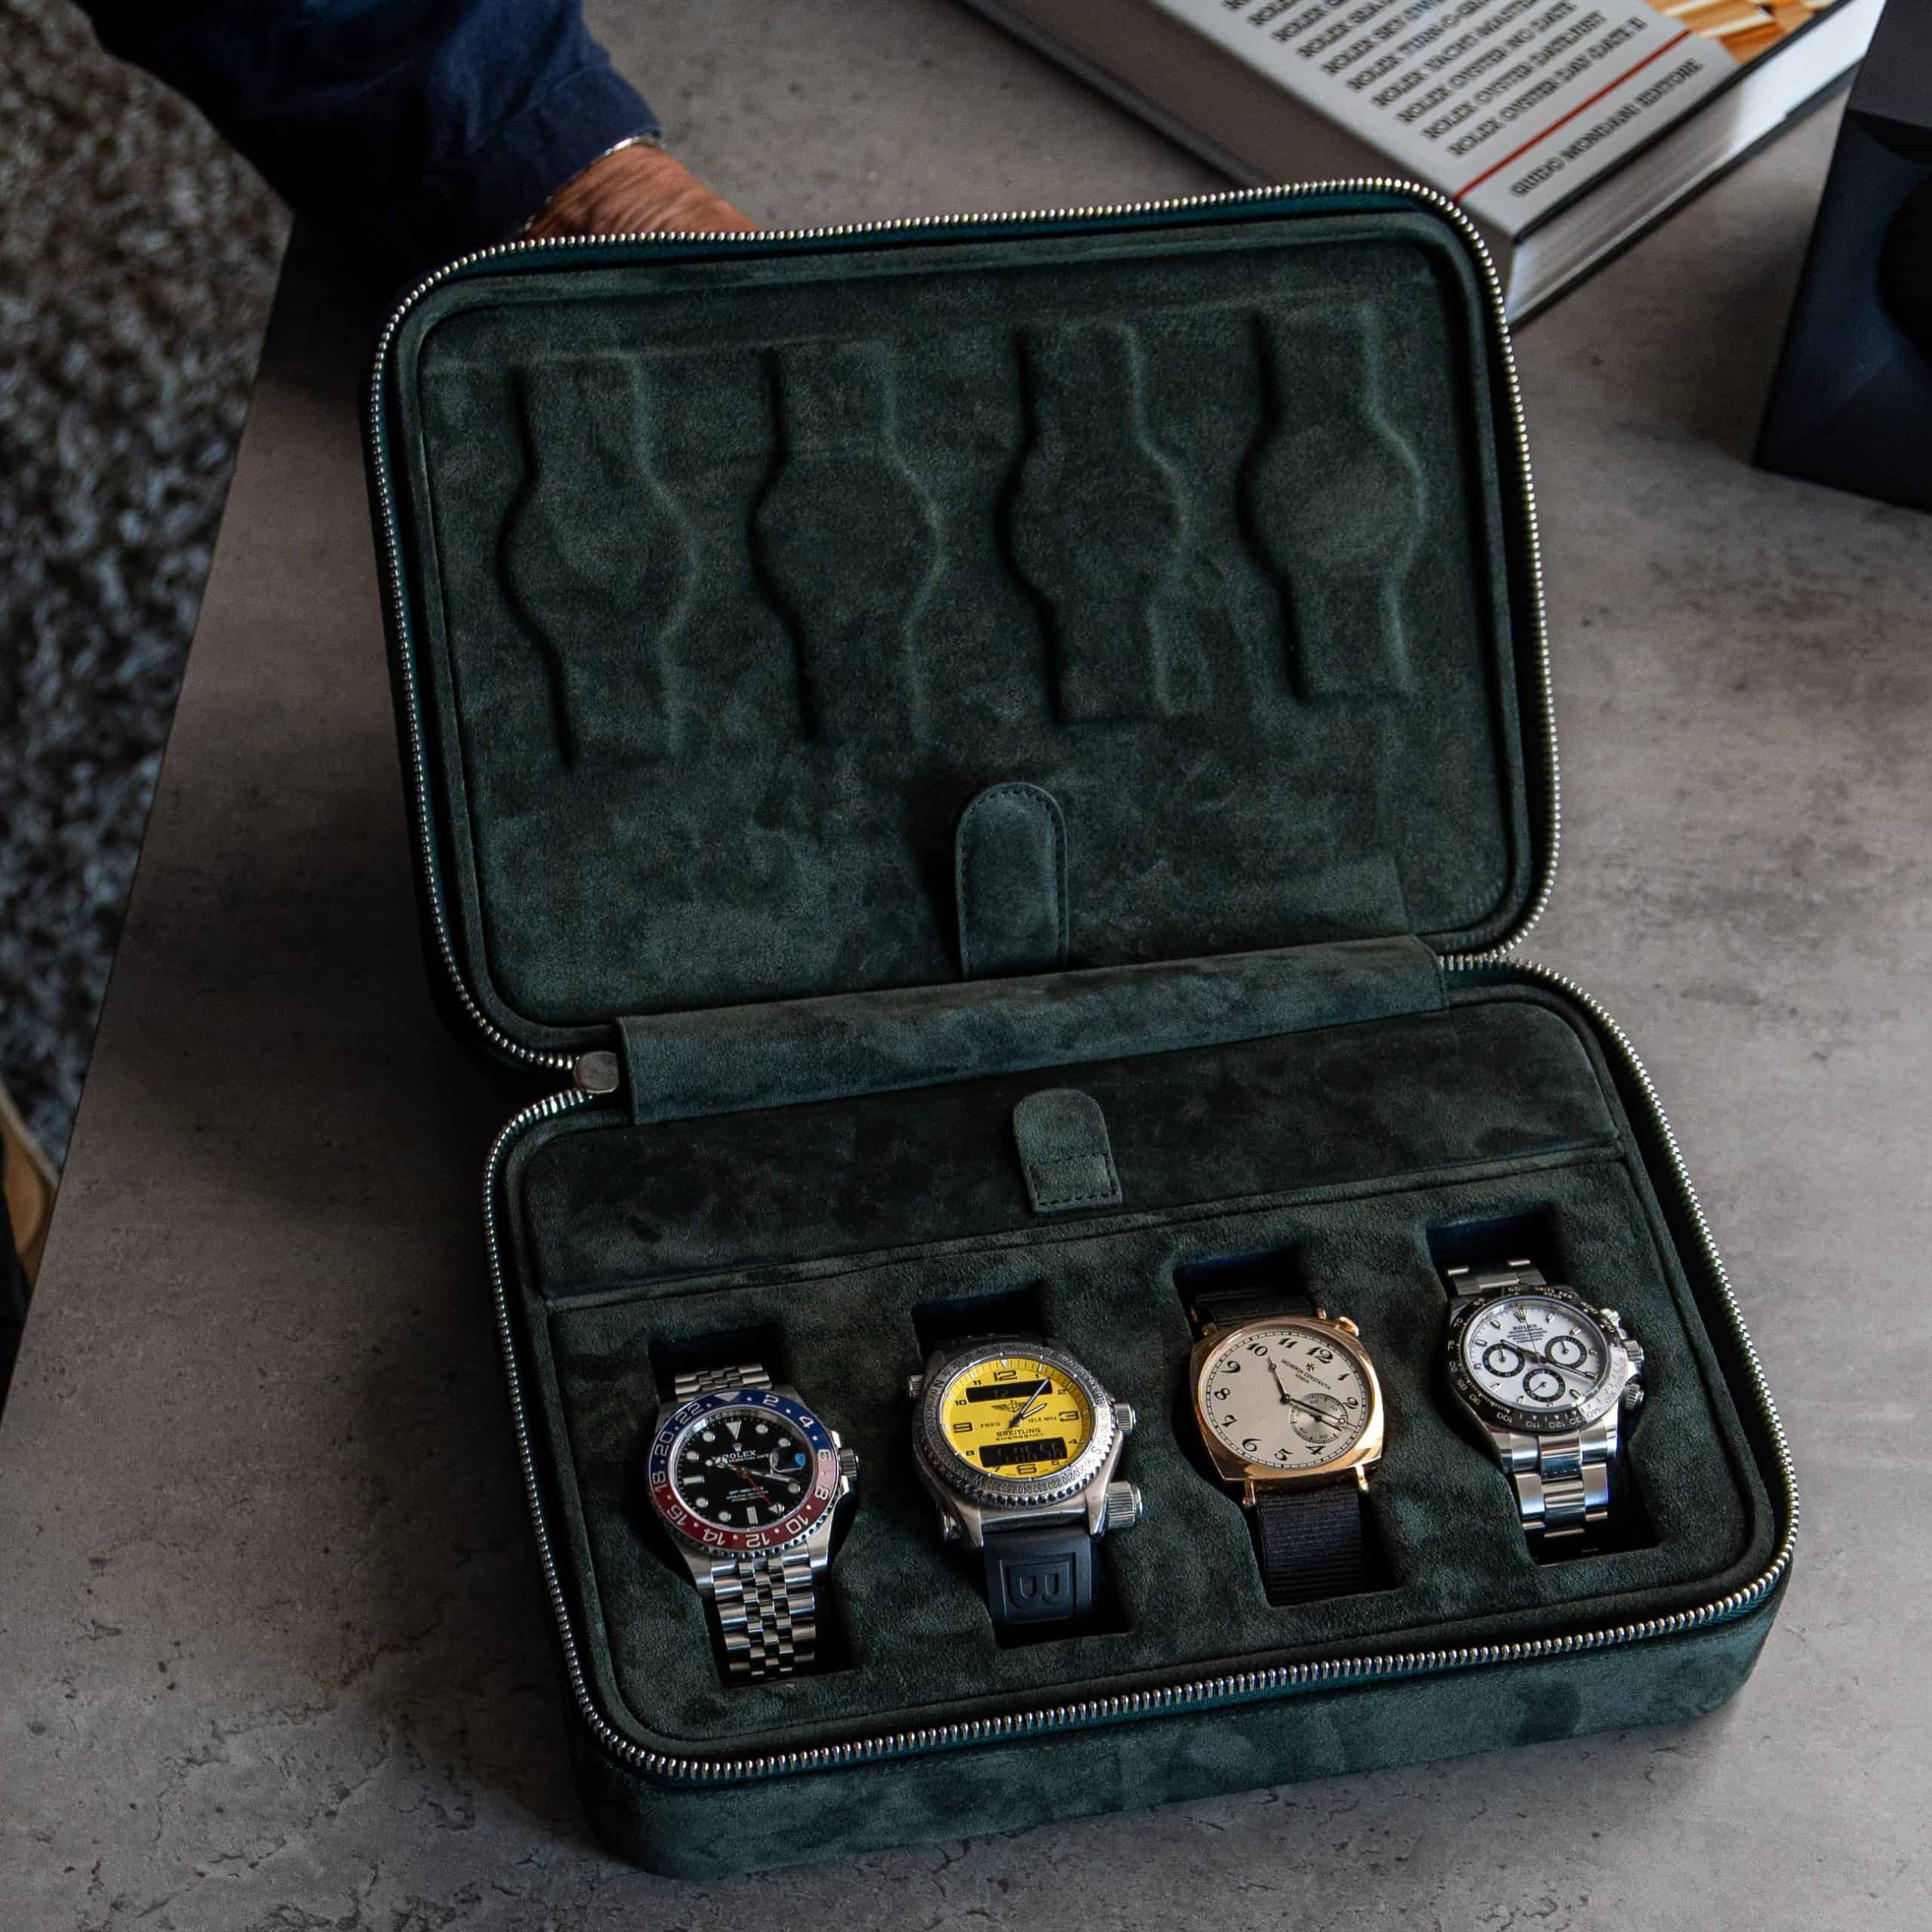 Forest Green 8 Slot Watch Box - $1,204 - Free shipping